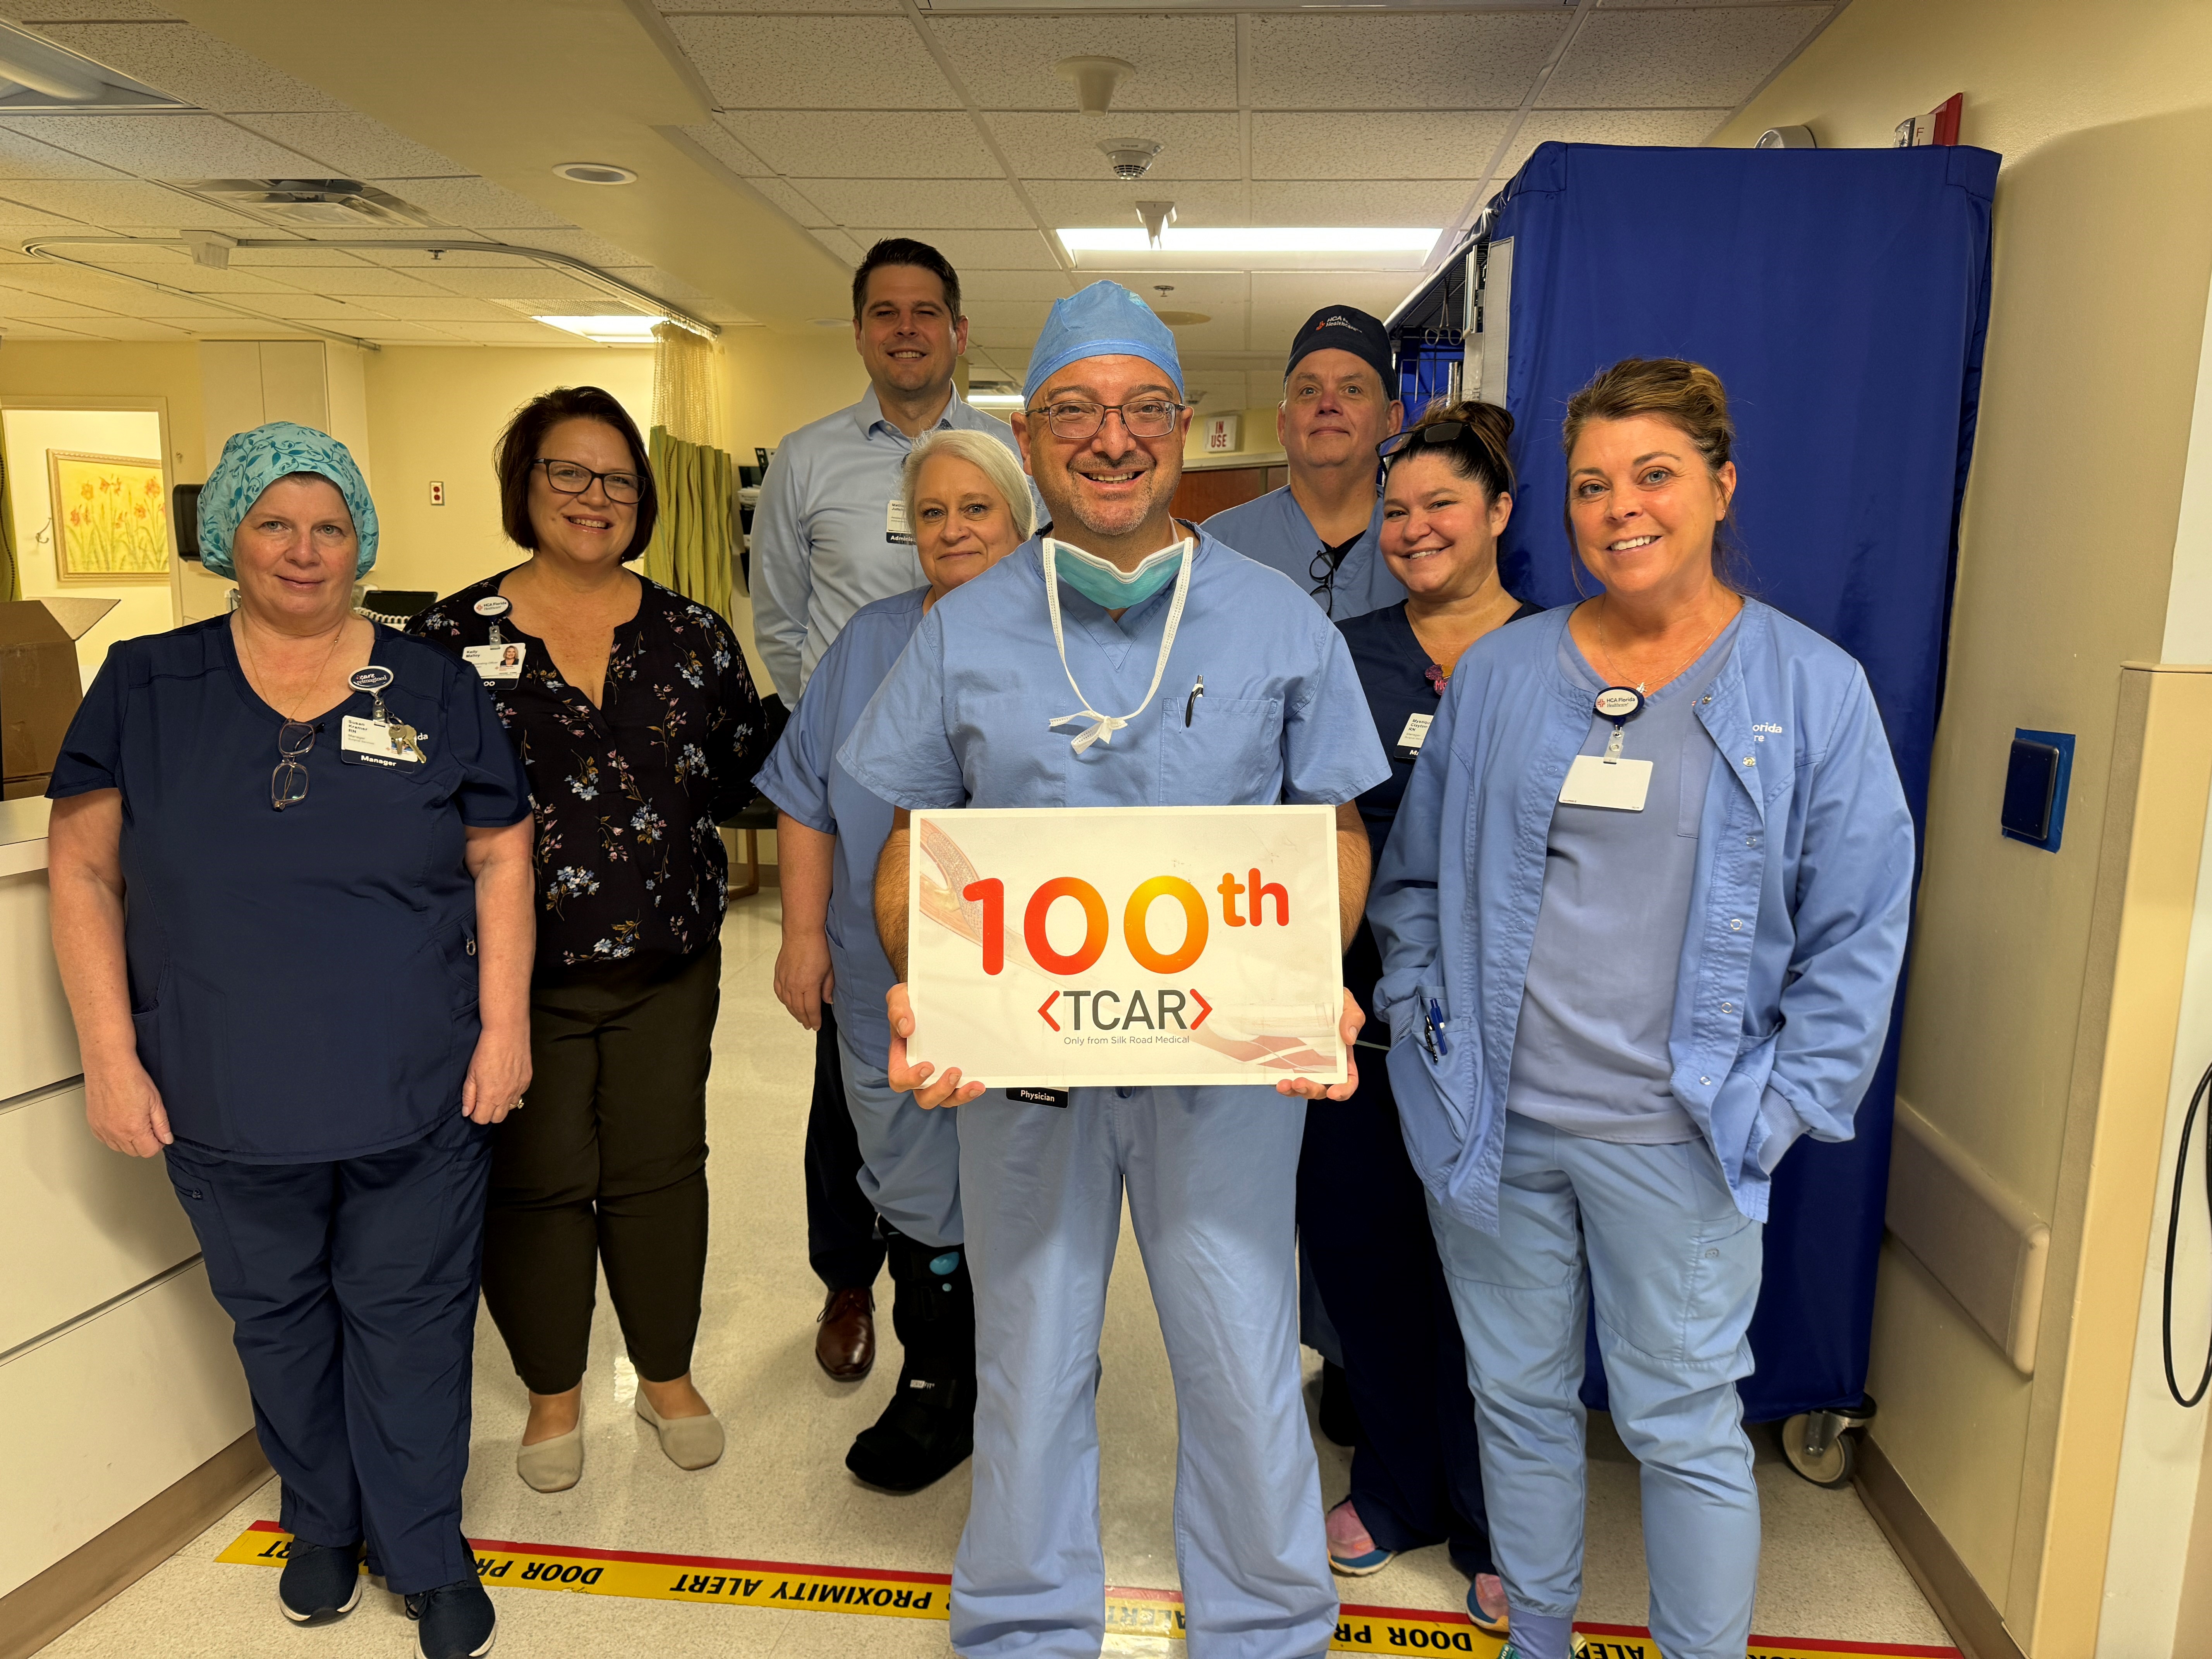 Doctor stands with surgical team smiling and holding sign that reads 100th.